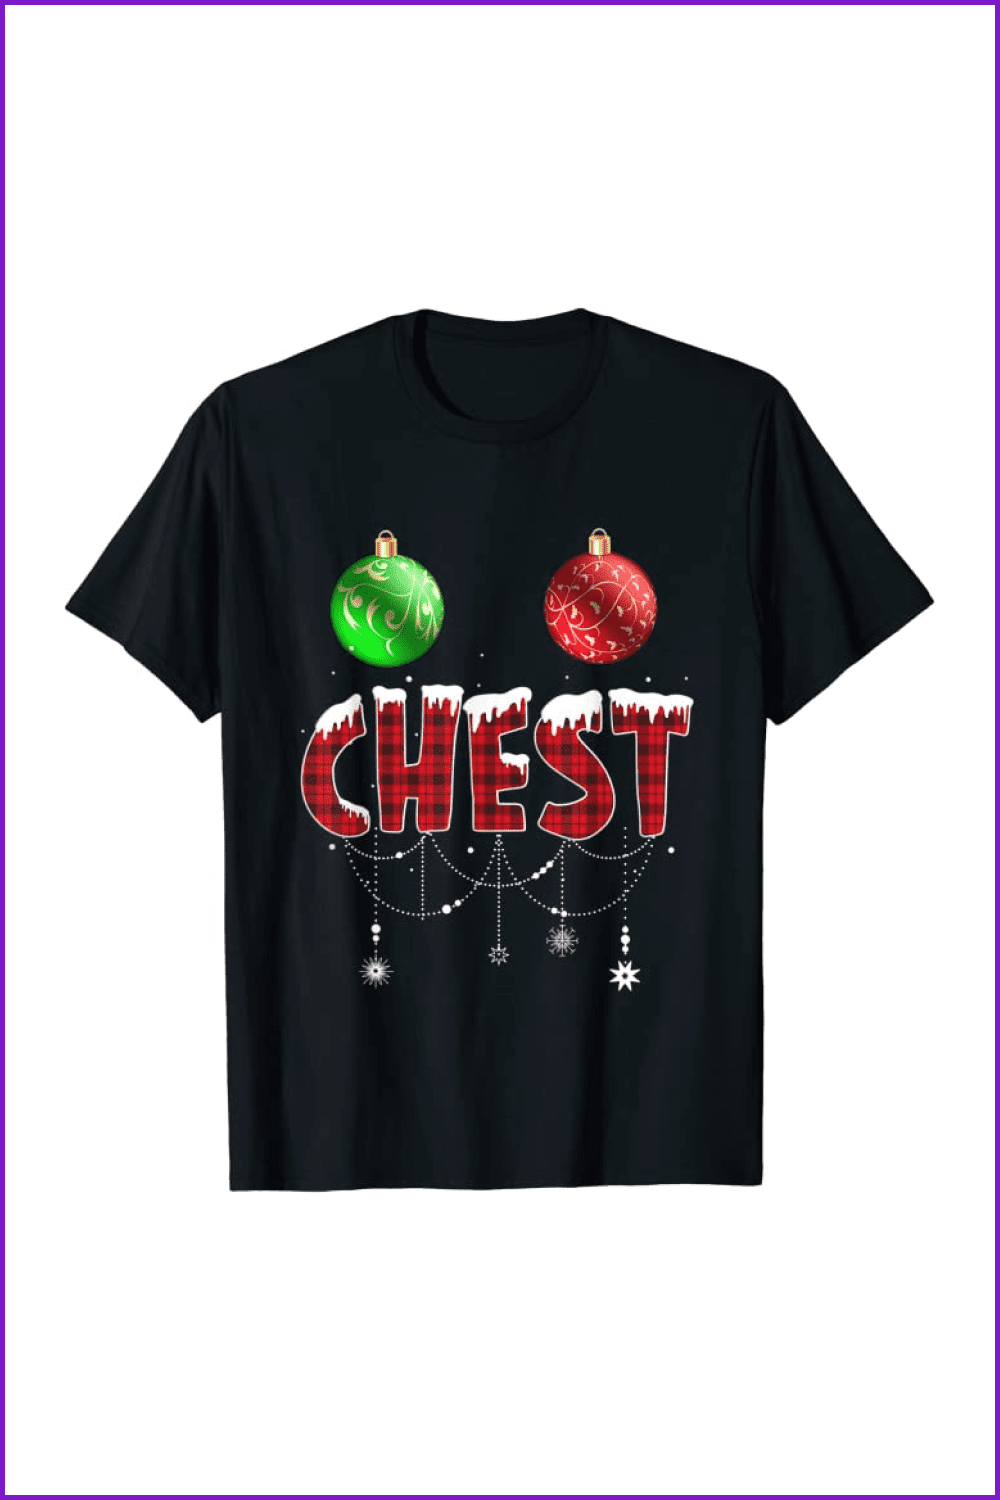 Black t-shirt with Christmas toys and chests.